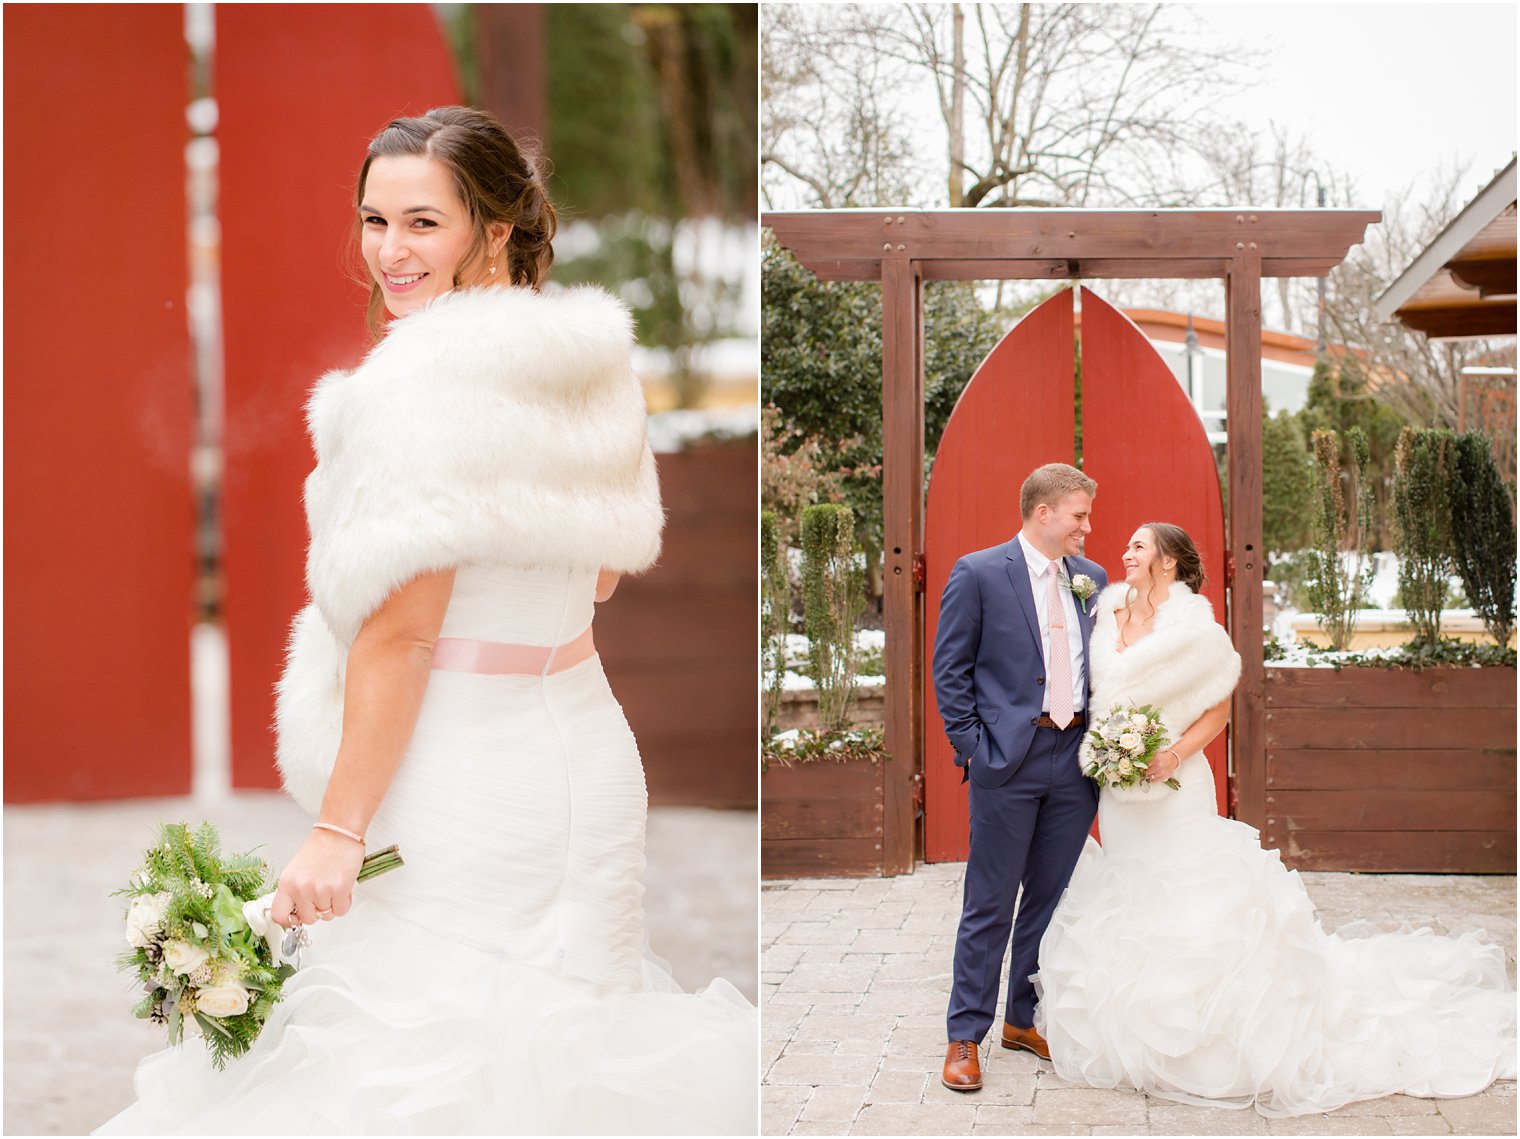 Bride with fur for winter wedding at Stone House at Stirling Ridge in Warren, NJ